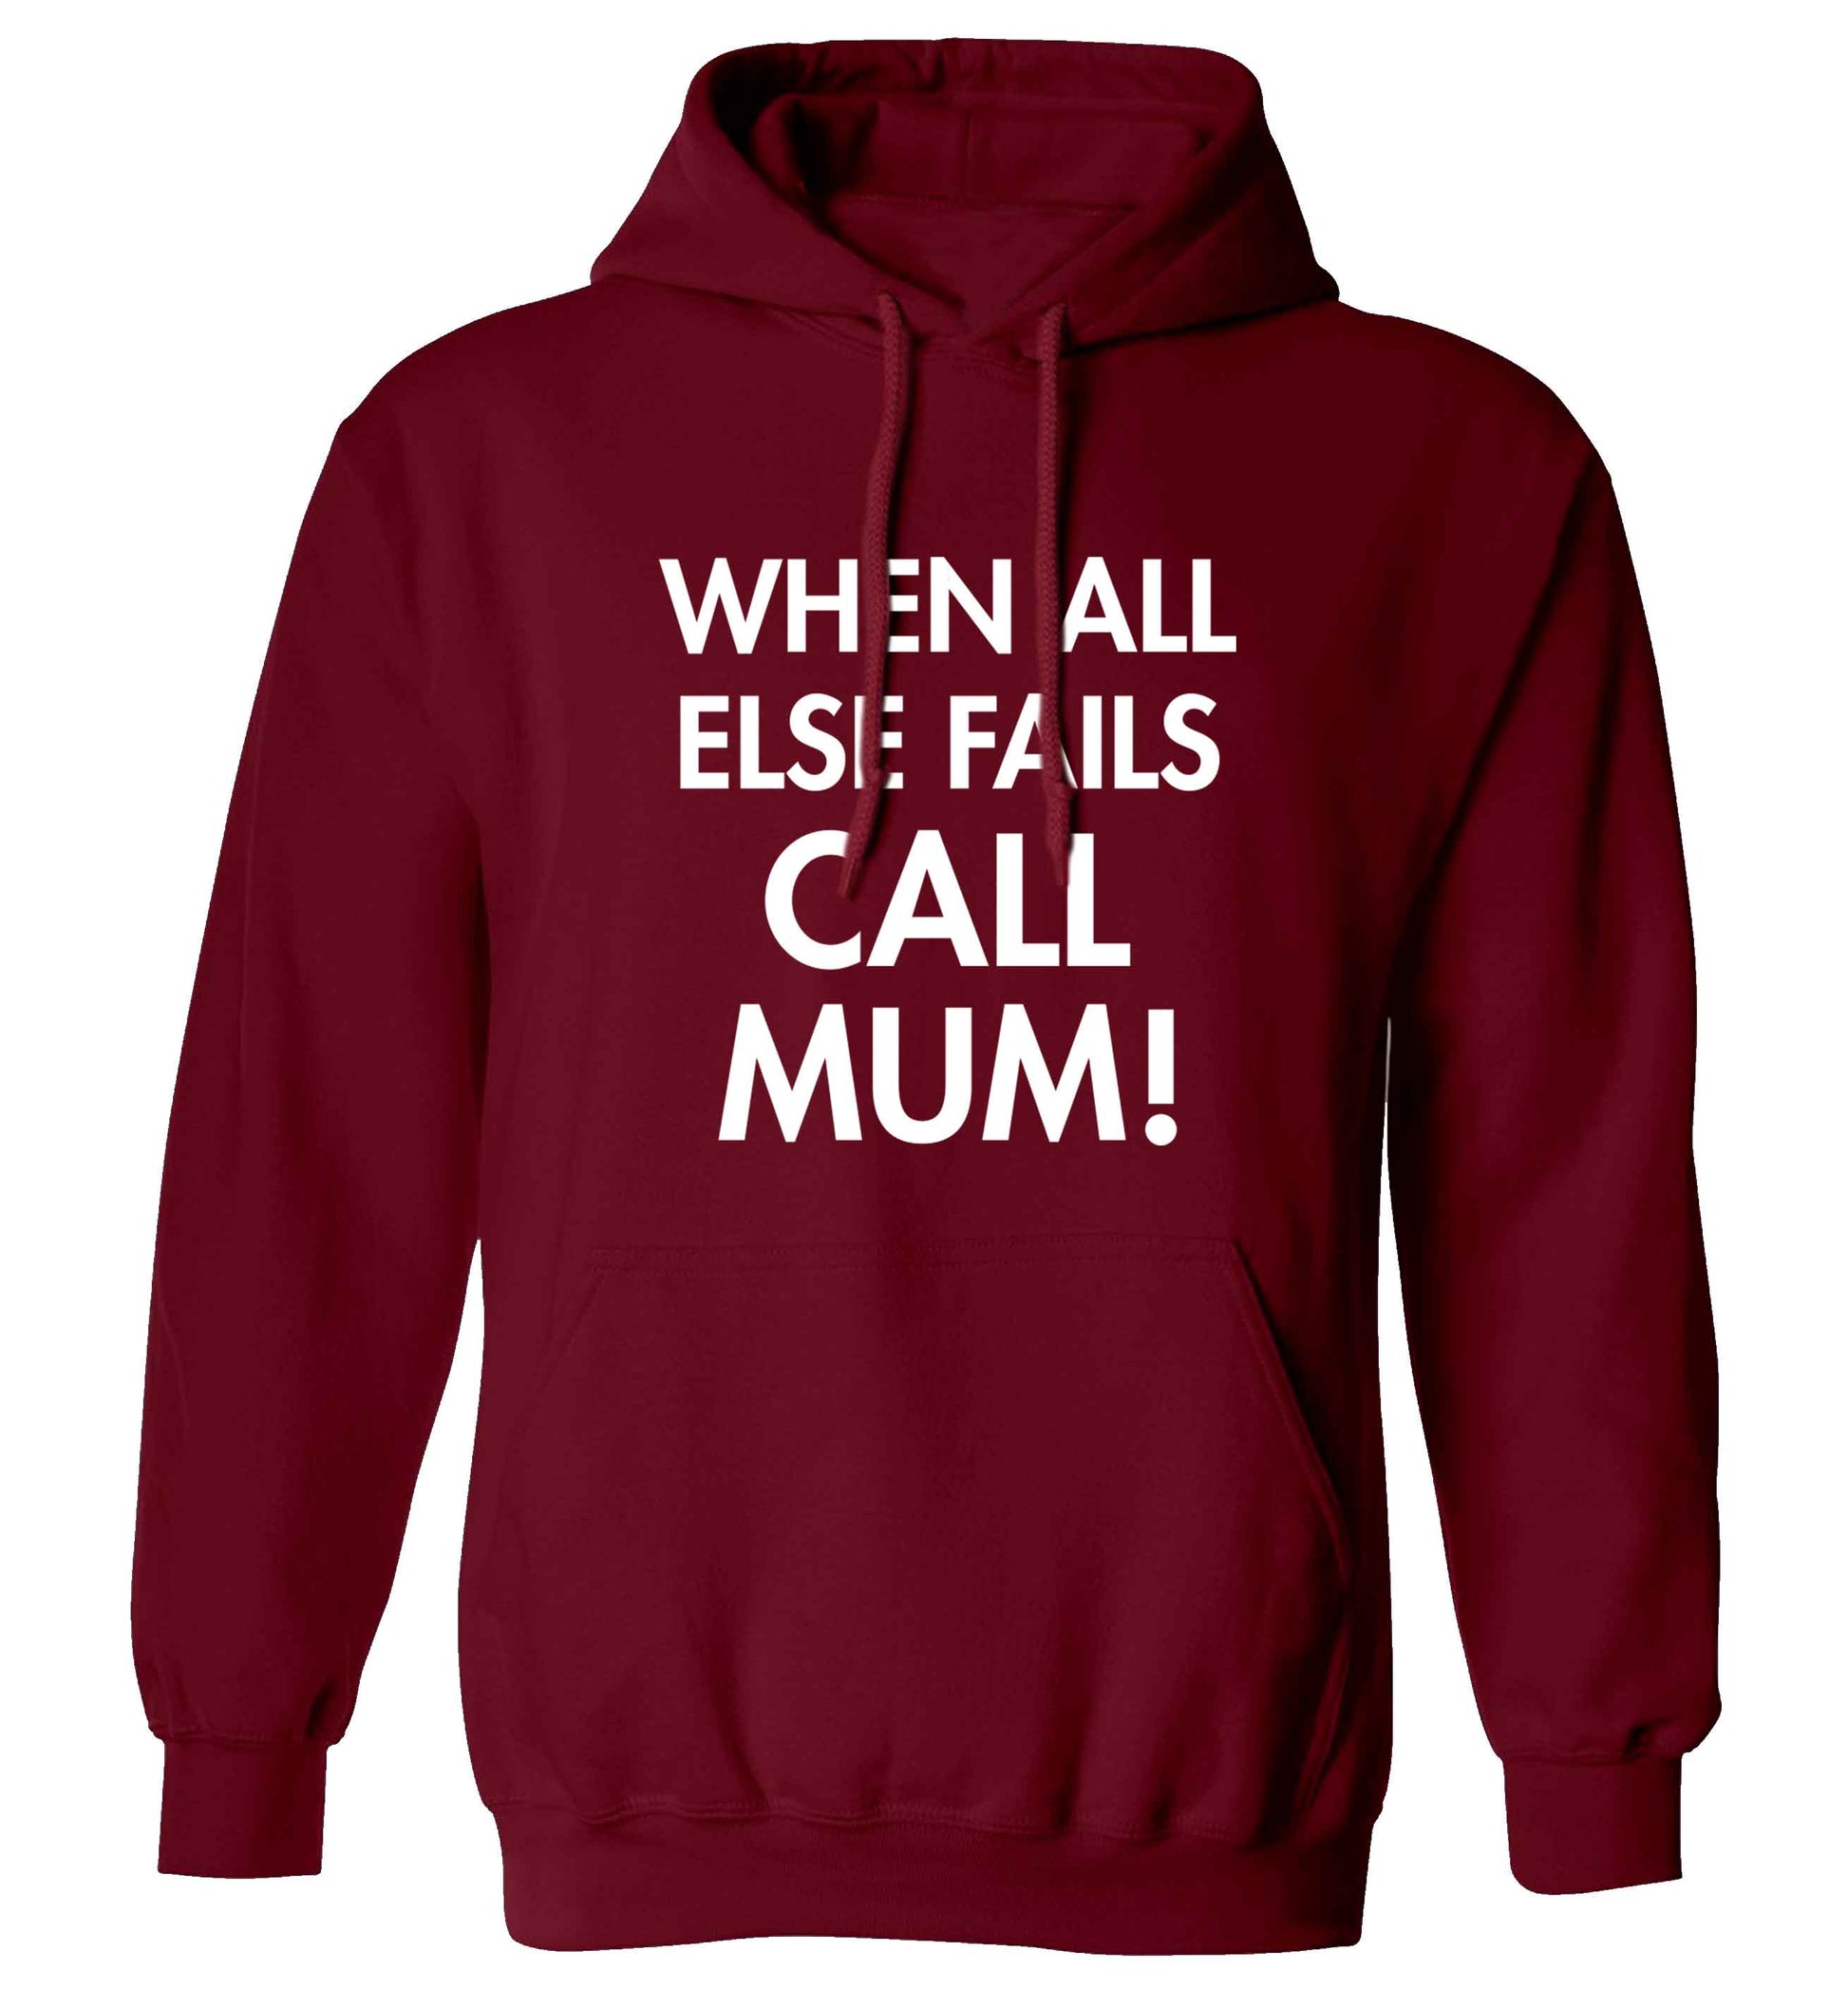 When all else fails call mum! adults unisex maroon hoodie 2XL